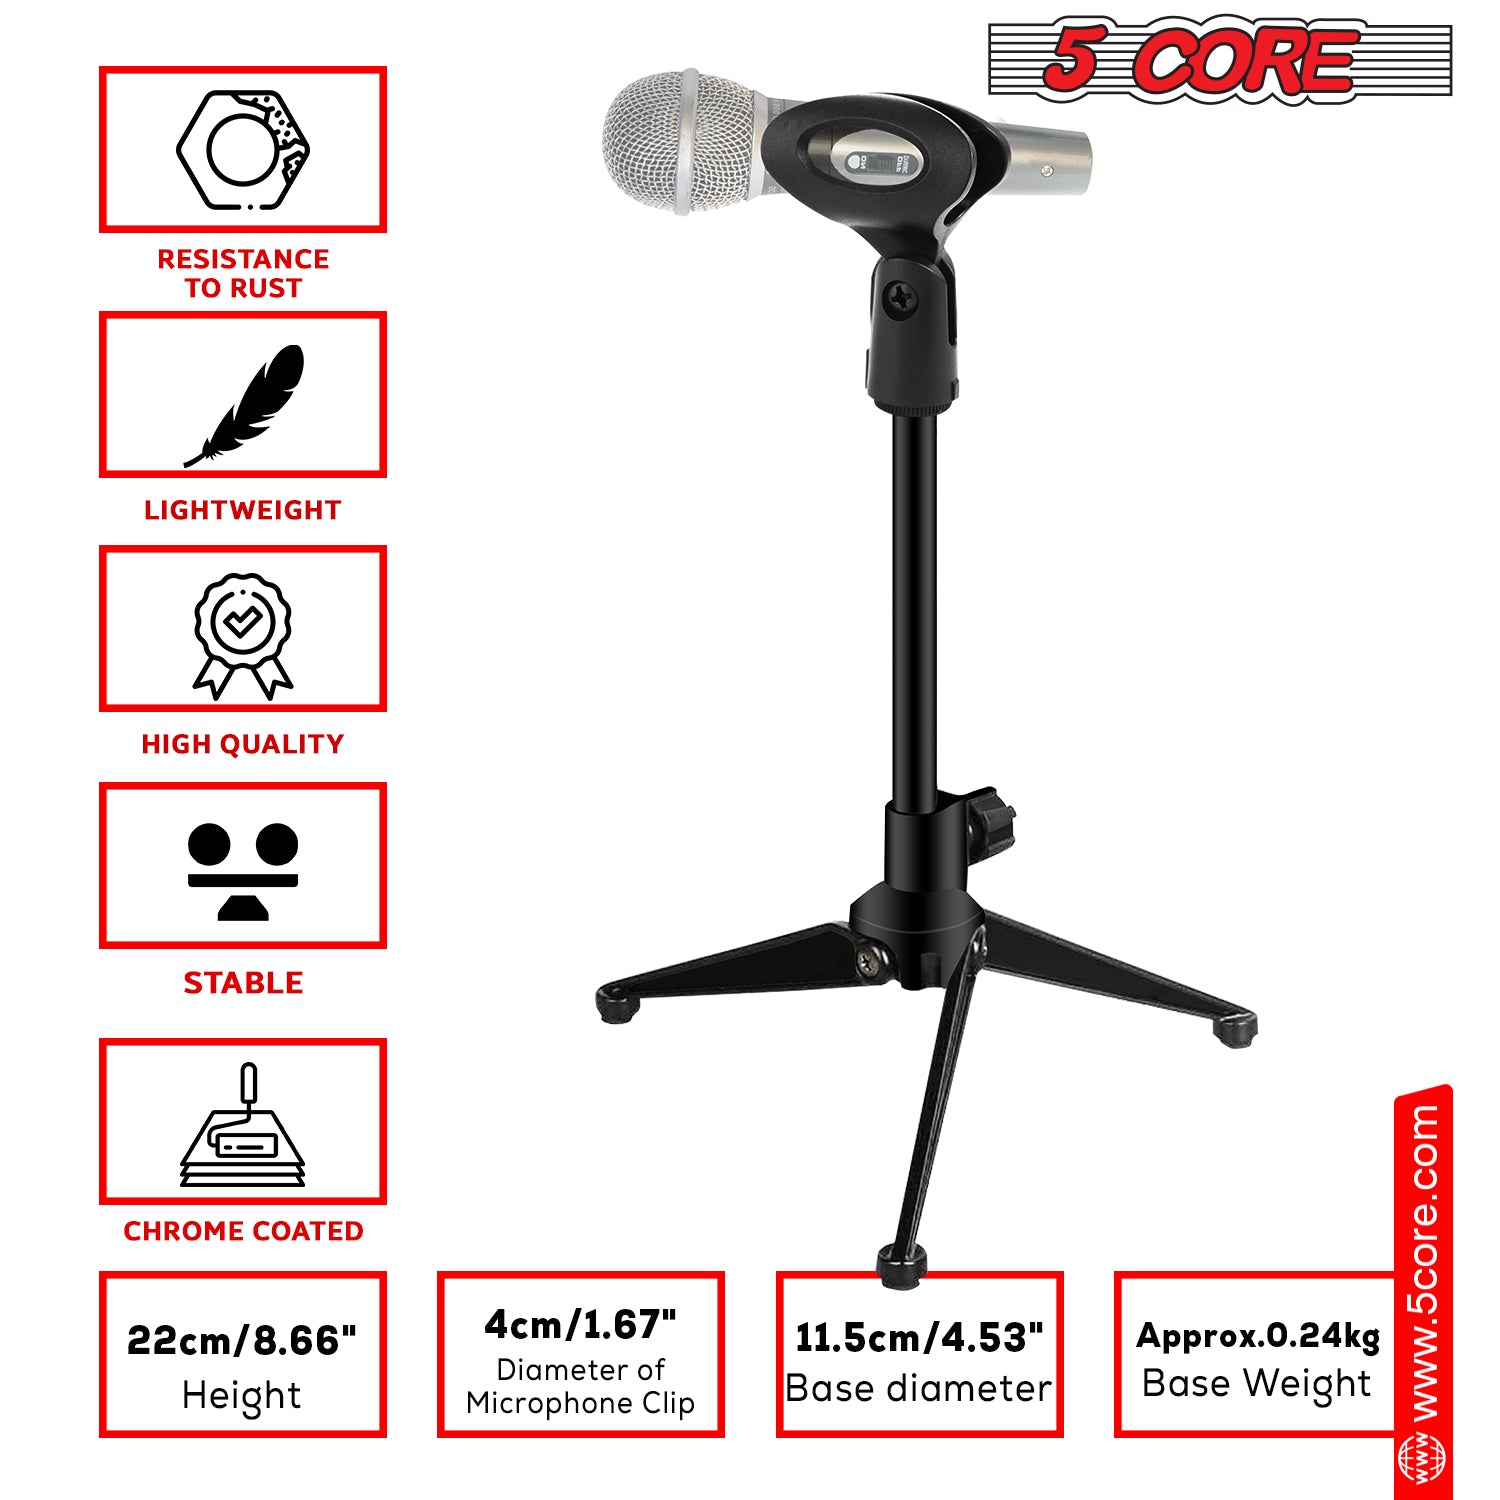 5 Core mini tripod mic stand: Compact and easy to use.